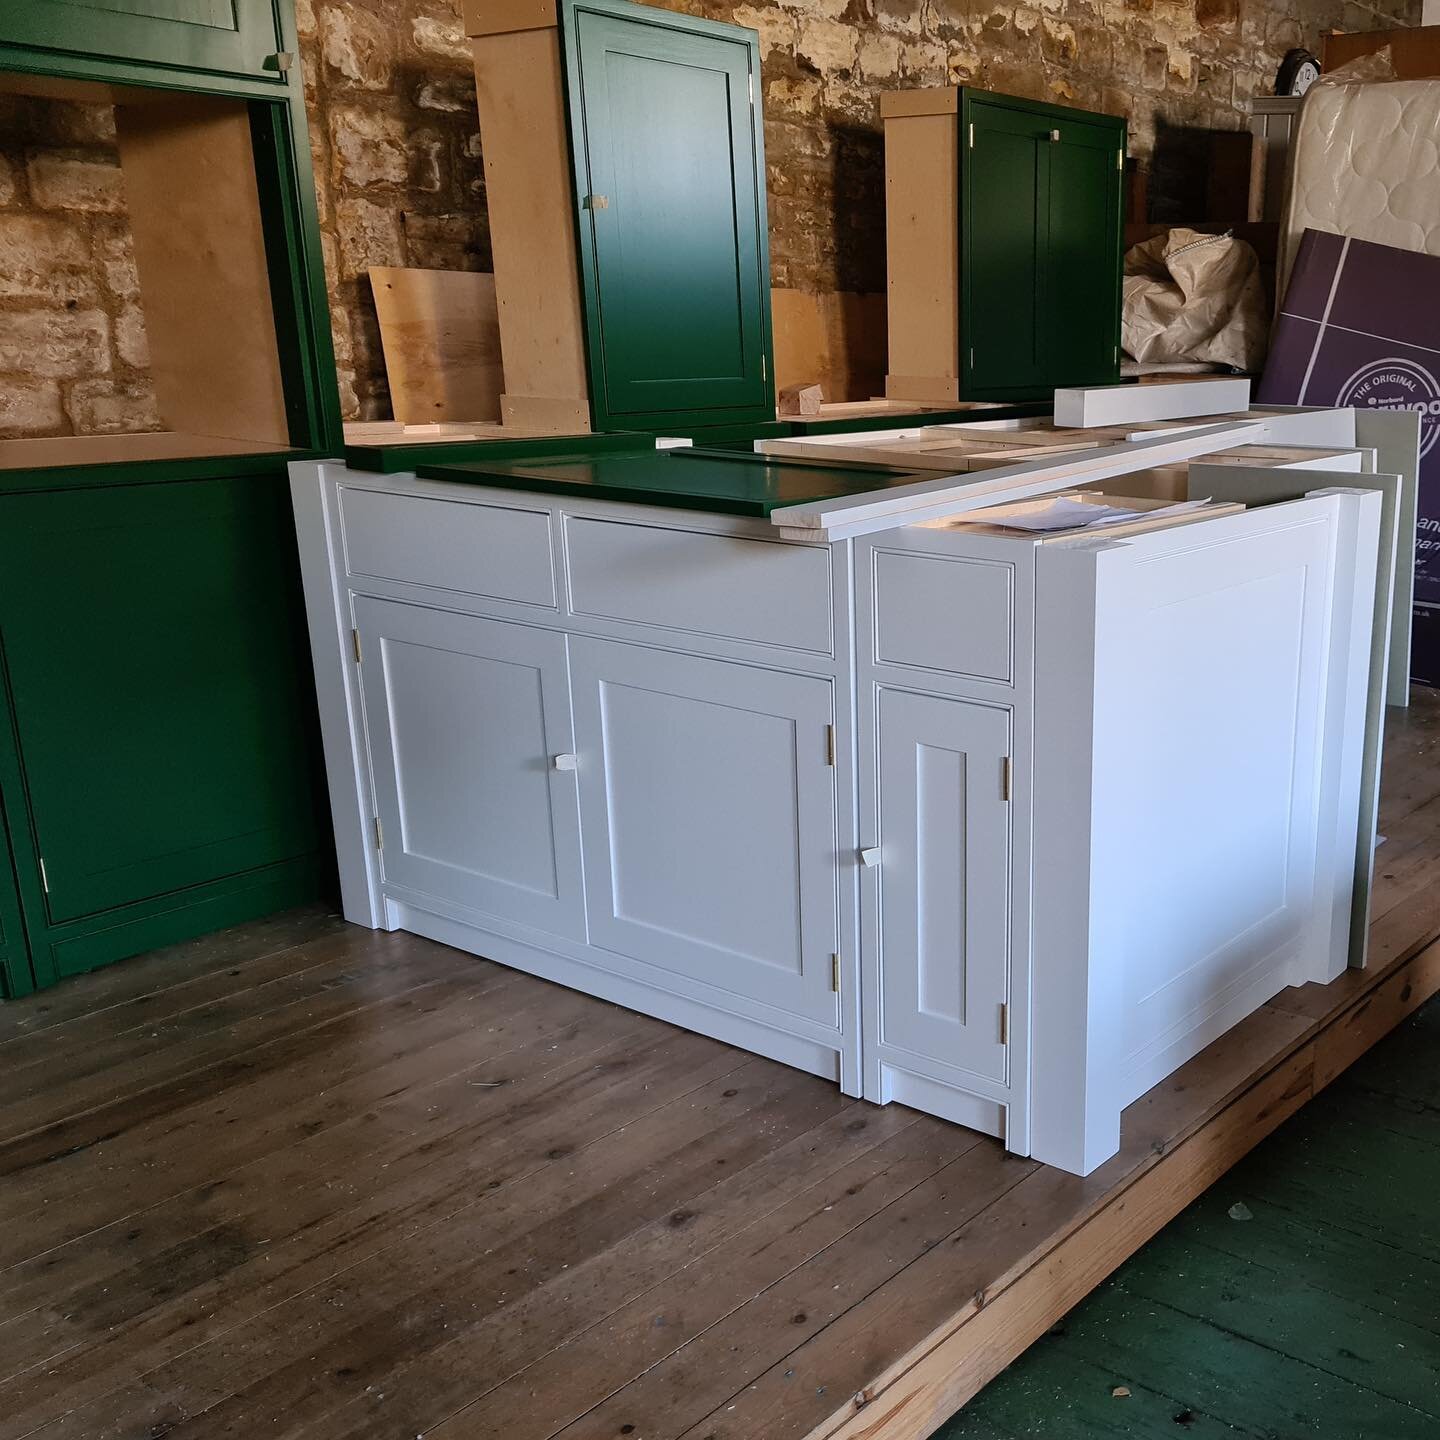 Kitchen painted and ready to go out to our client Little Greene Puck &amp; Brilliant White! 

If you have any questions or would like to send over your designs, send the team an email on info@framedkitchens.co.uk. 🏡